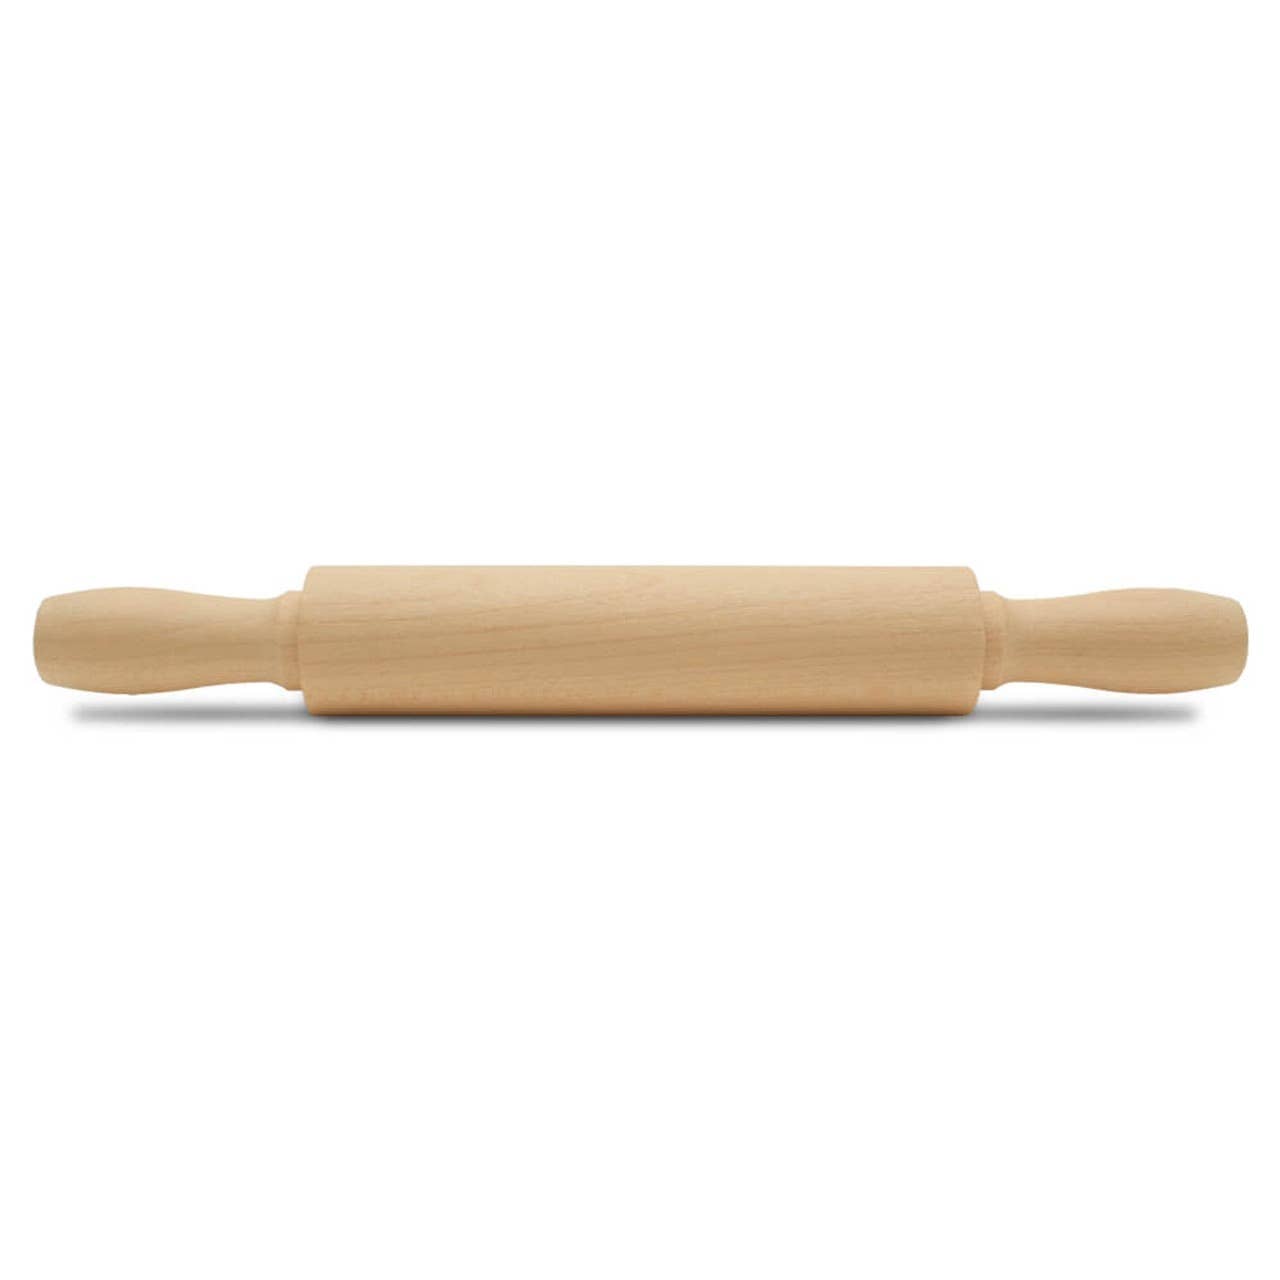 Wooden Rolling Pin for Food or Play Dough